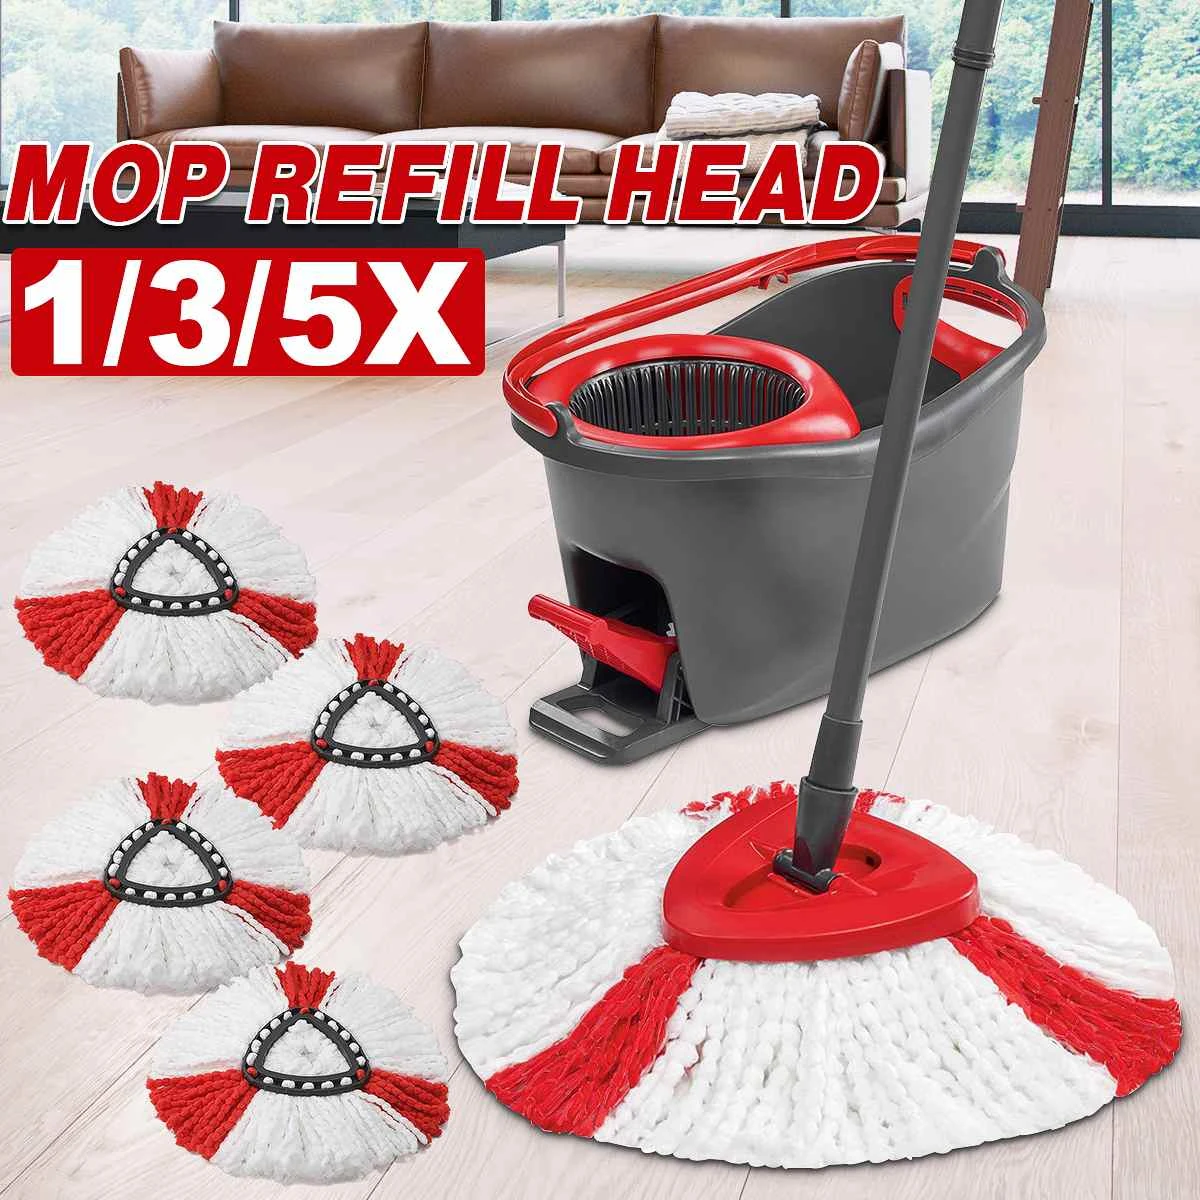 Microfiber Replacement | Vileda Spin Mop Replacement | Mop Accessories - Cleaning Cloths - Aliexpress